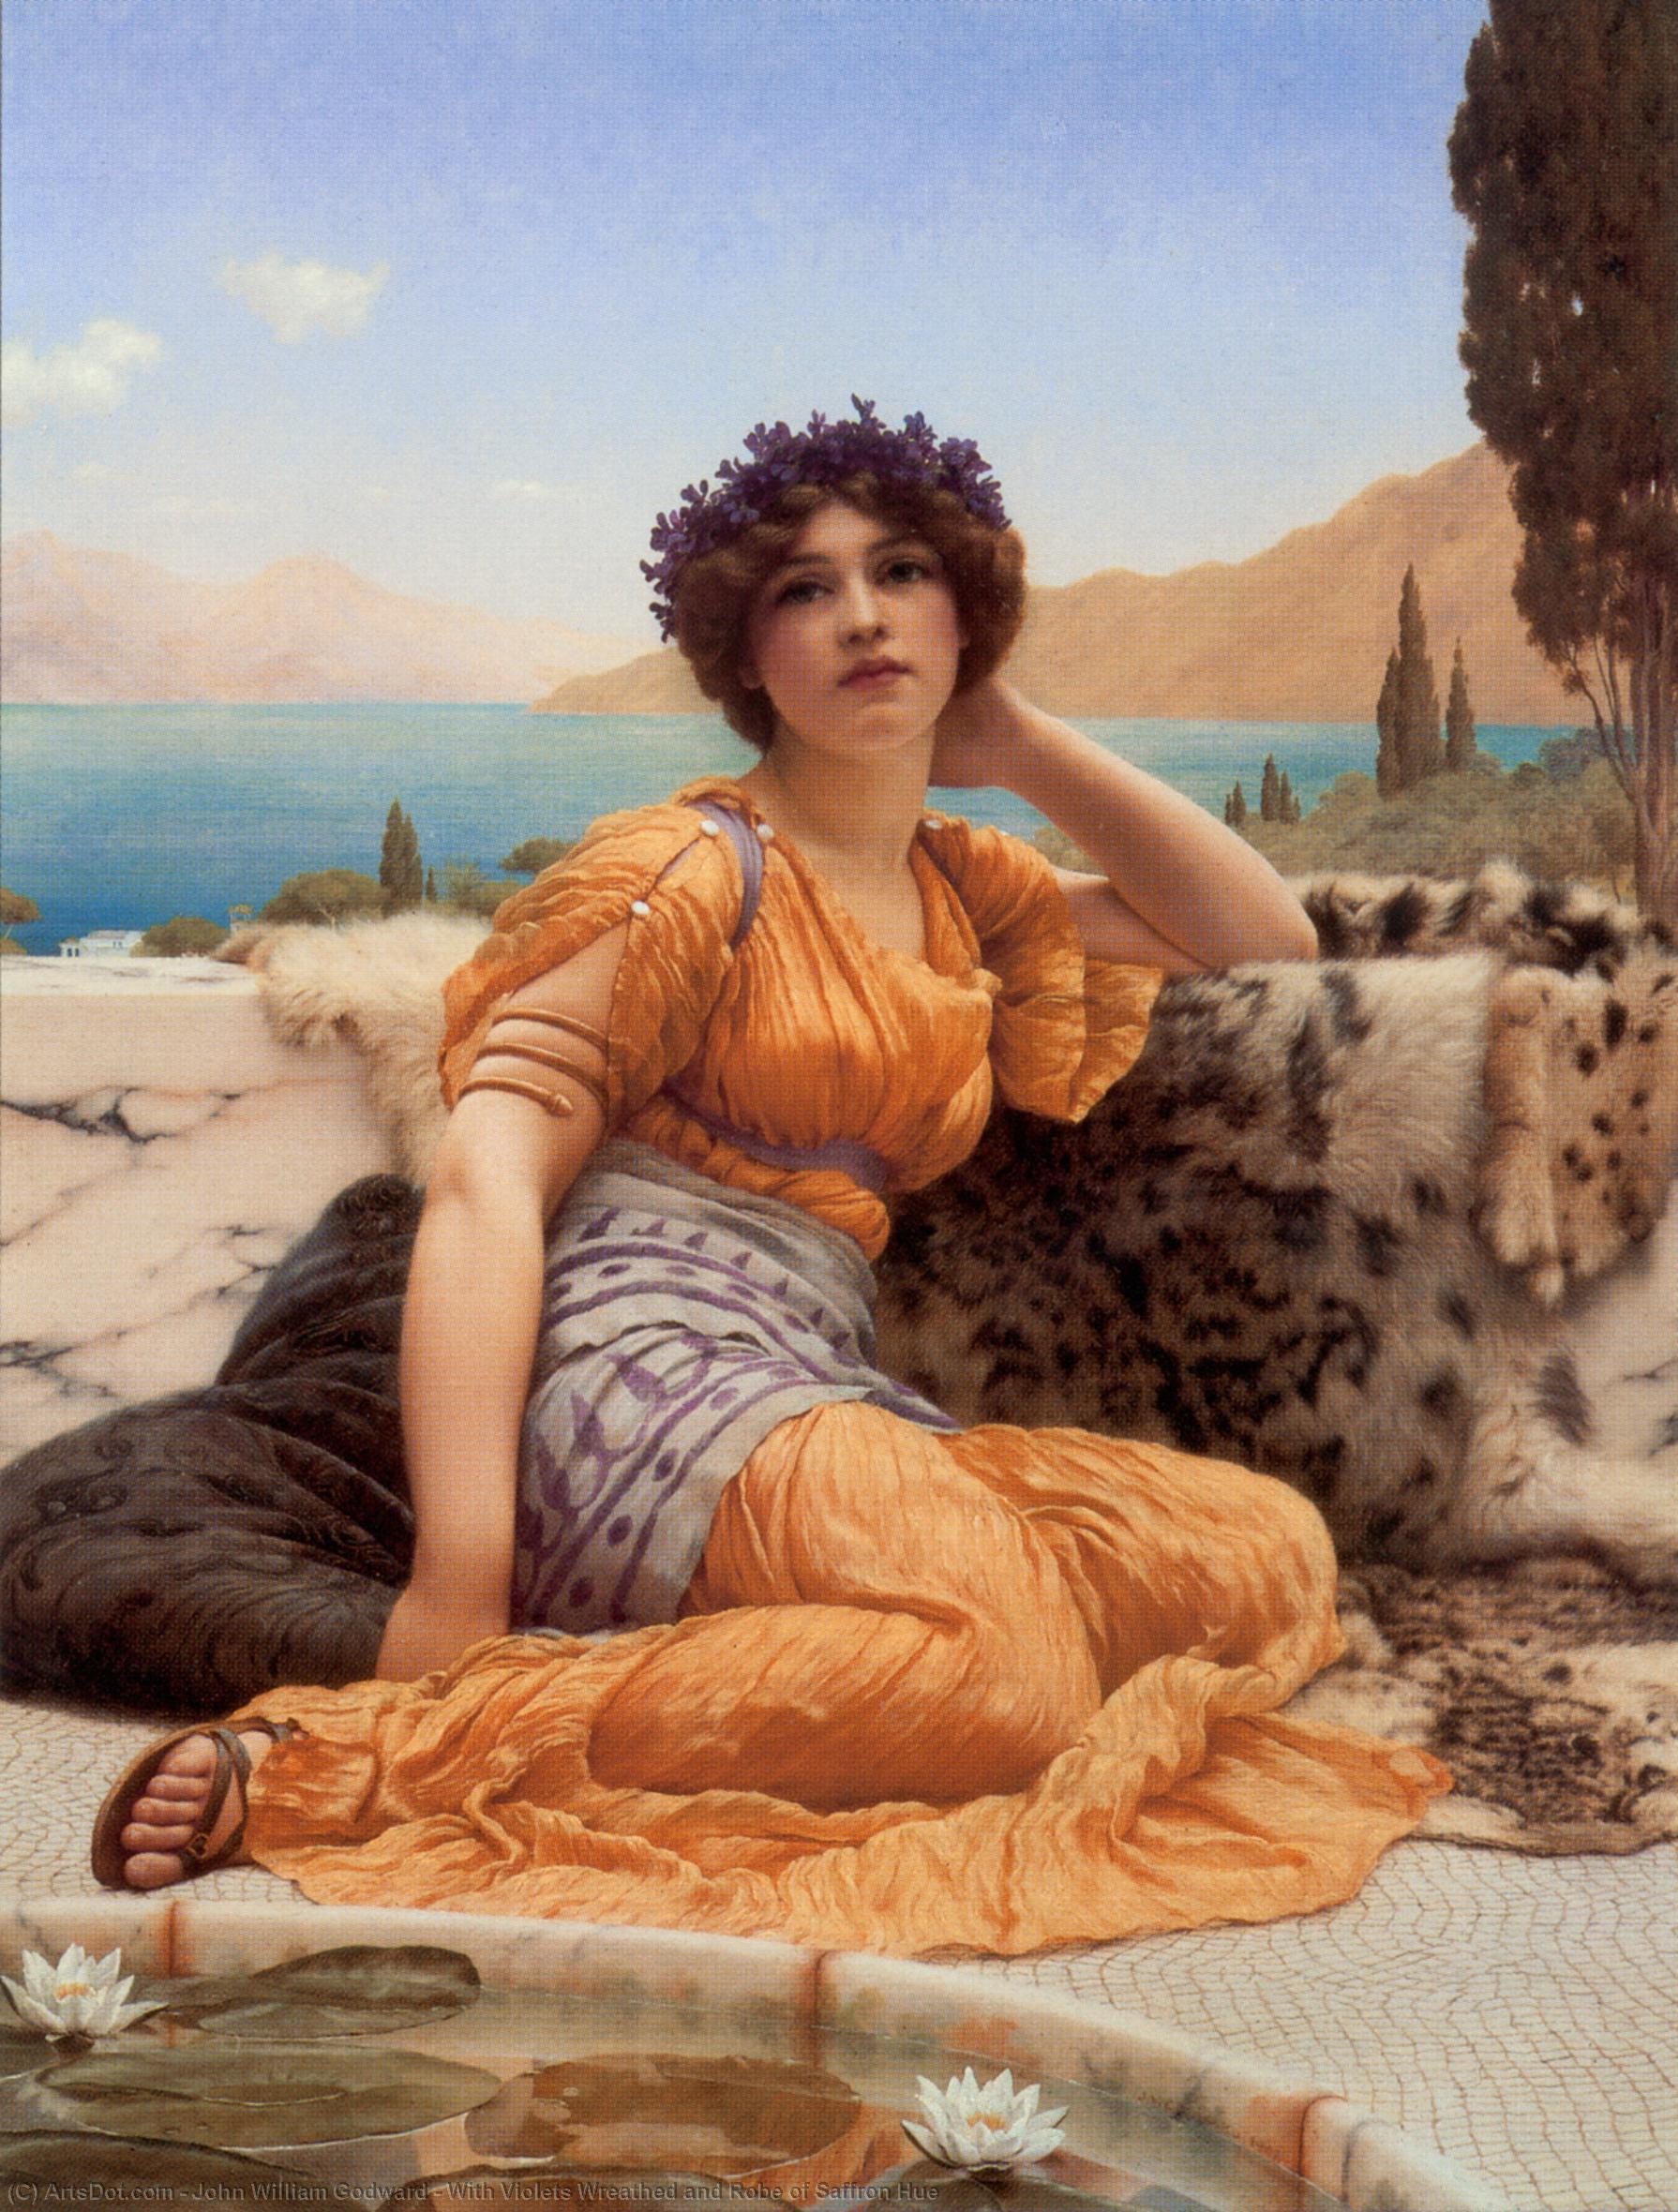 WikiOO.org - Encyclopedia of Fine Arts - Lukisan, Artwork John William Godward - With Violets Wreathed and Robe of Saffron Hue